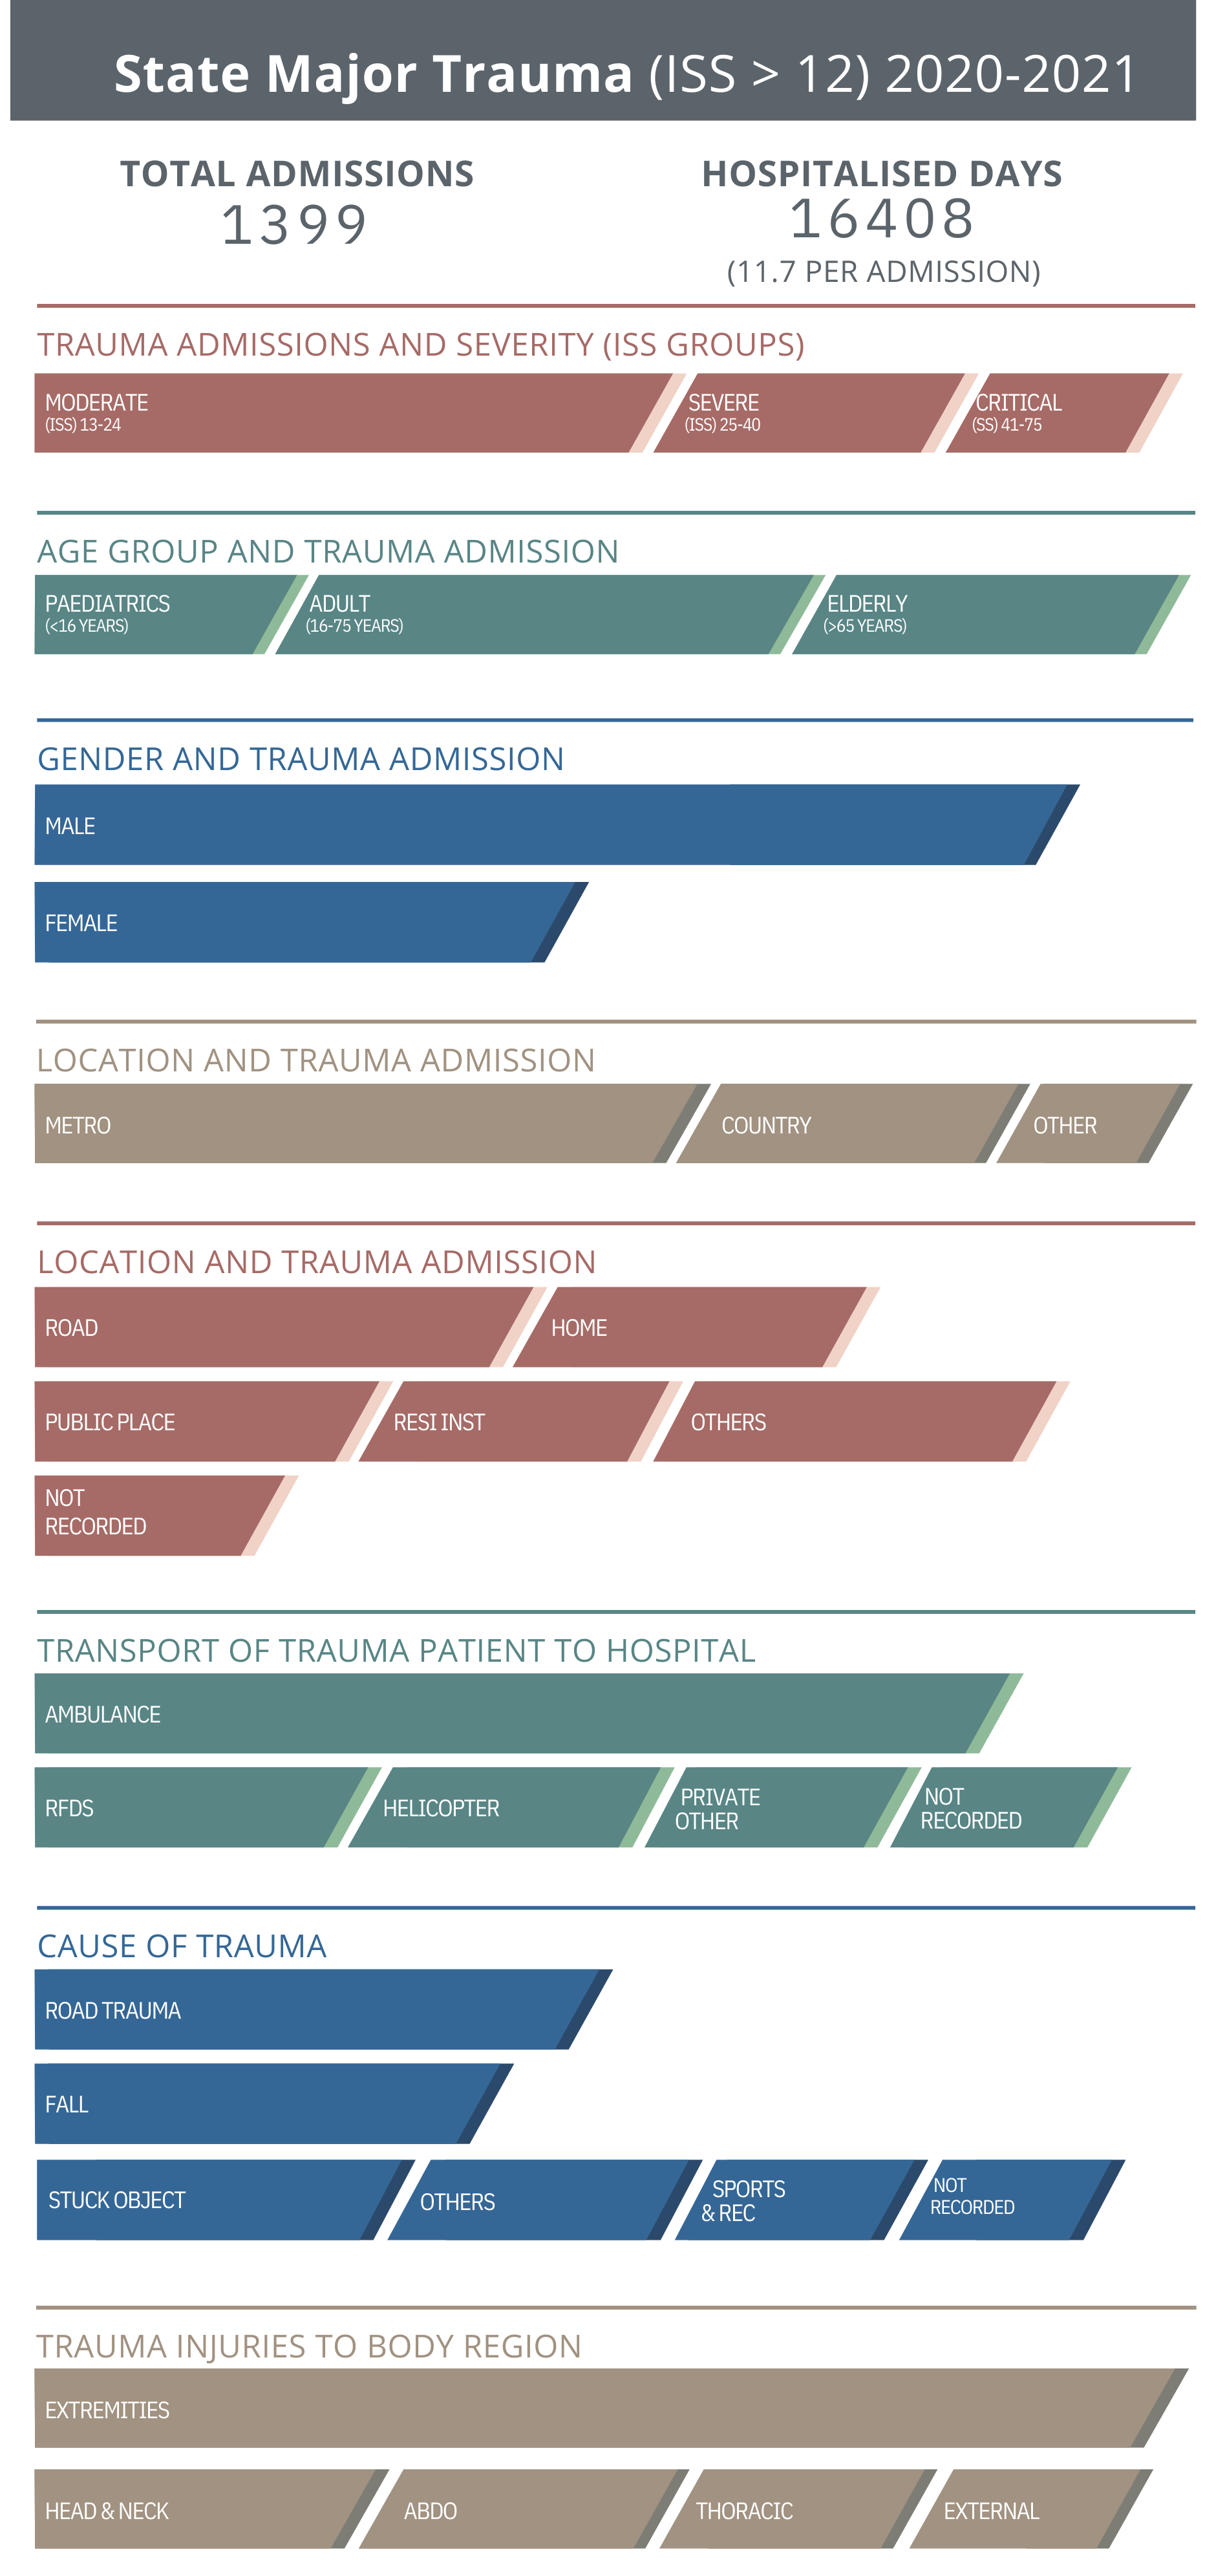 Image displaying State Major Trauma's admissions for 2020 - 2021